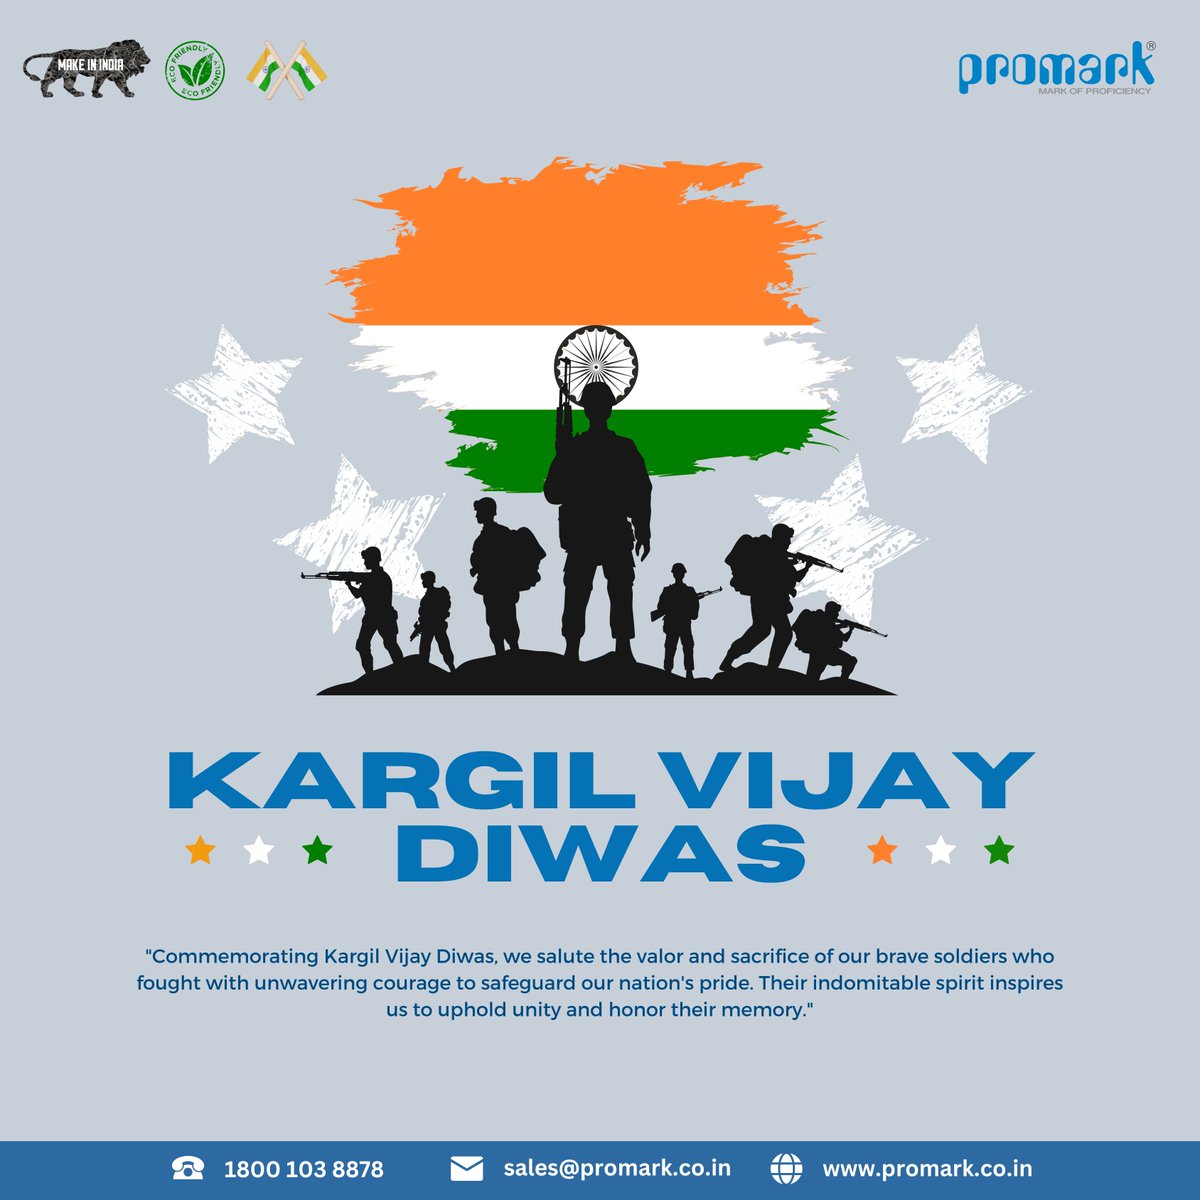 'Remembering the indomitable spirit of our brave soldiers who triumphed in the face of adversity during the Kargil War. Saluting their courage, valor, and sacrifice on this Vijay Diwas.
.
.
#Promark #KargilVijayDiwas #SalutingOurHeroes #RememberingTheBrave #VictoryOverAdversity